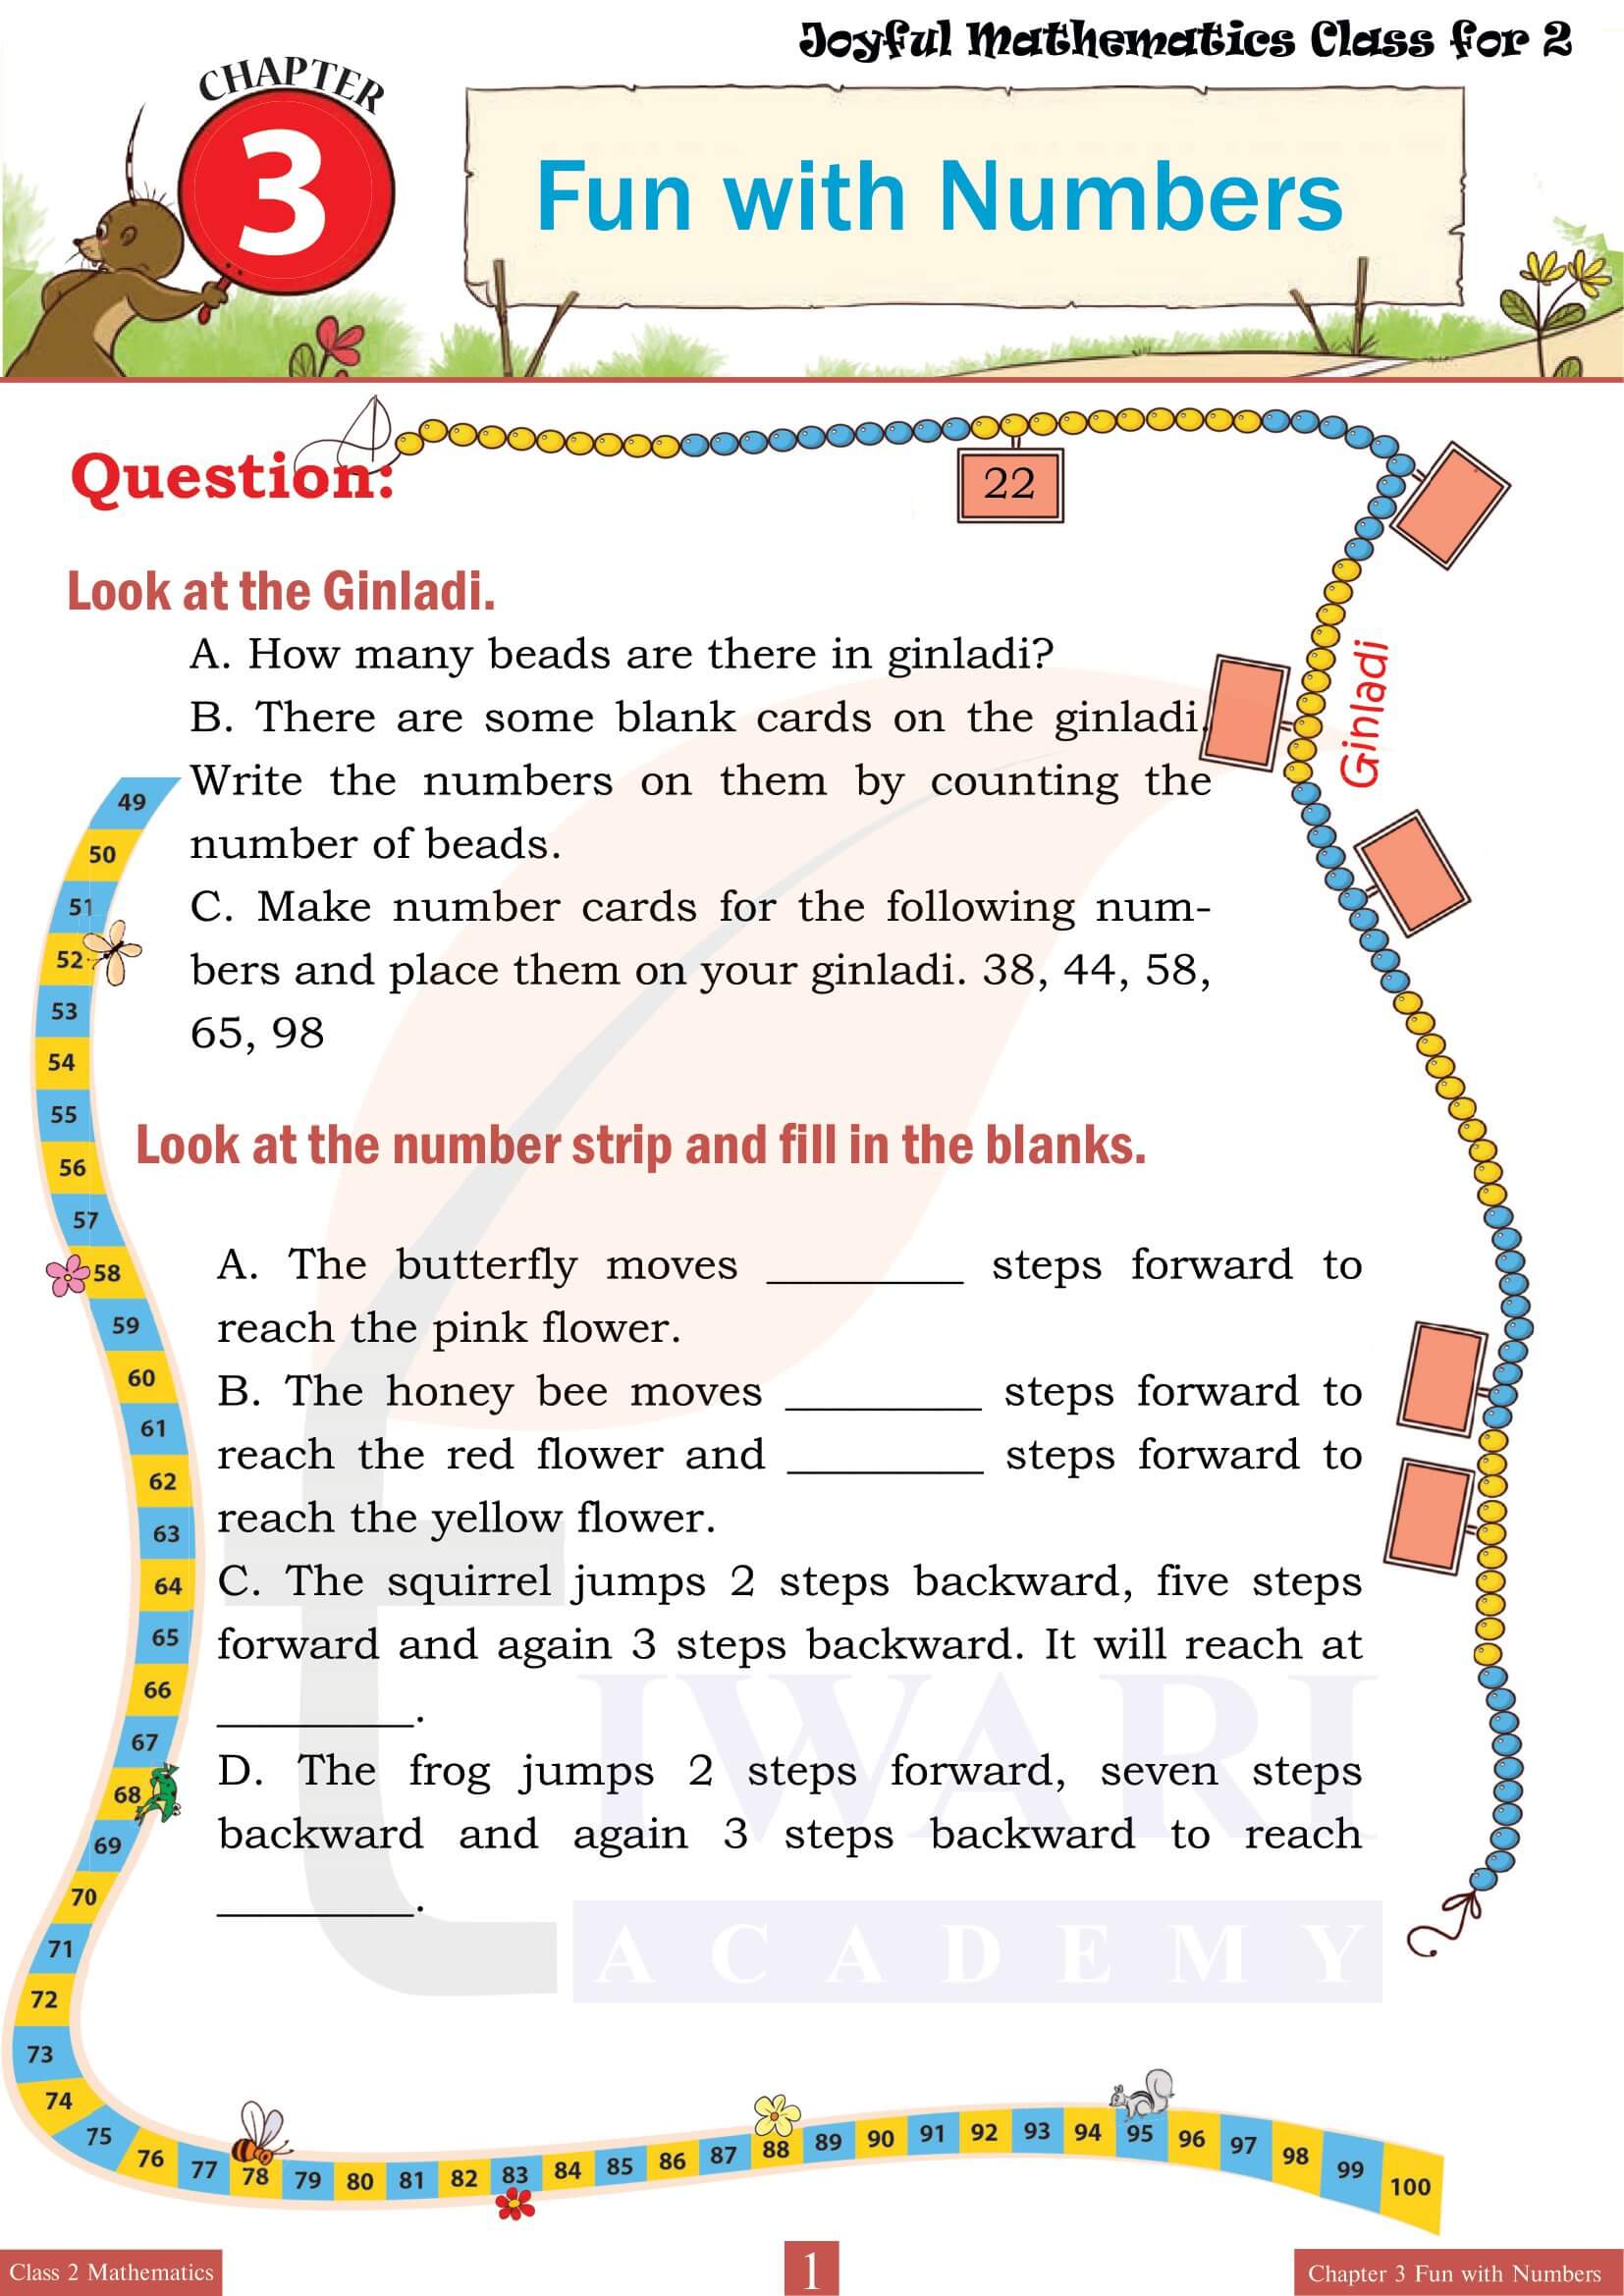 NCERT Solutions for Class 2 Joyful Maths Chapter 3 Fun with Numbers (Numbers 1 to 100)